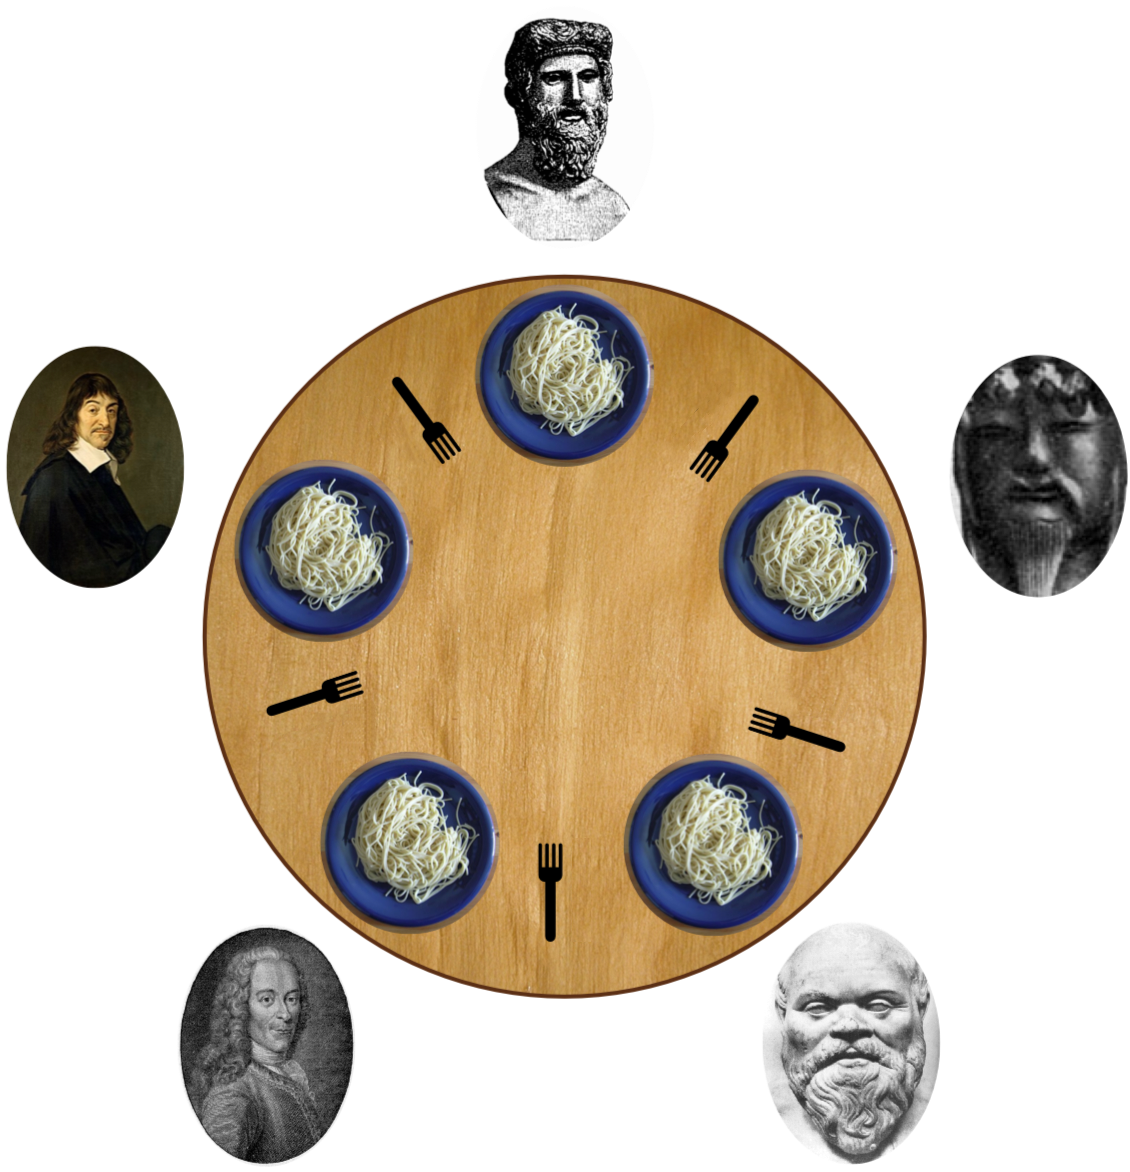 Dining philosophers, from Wikipedia